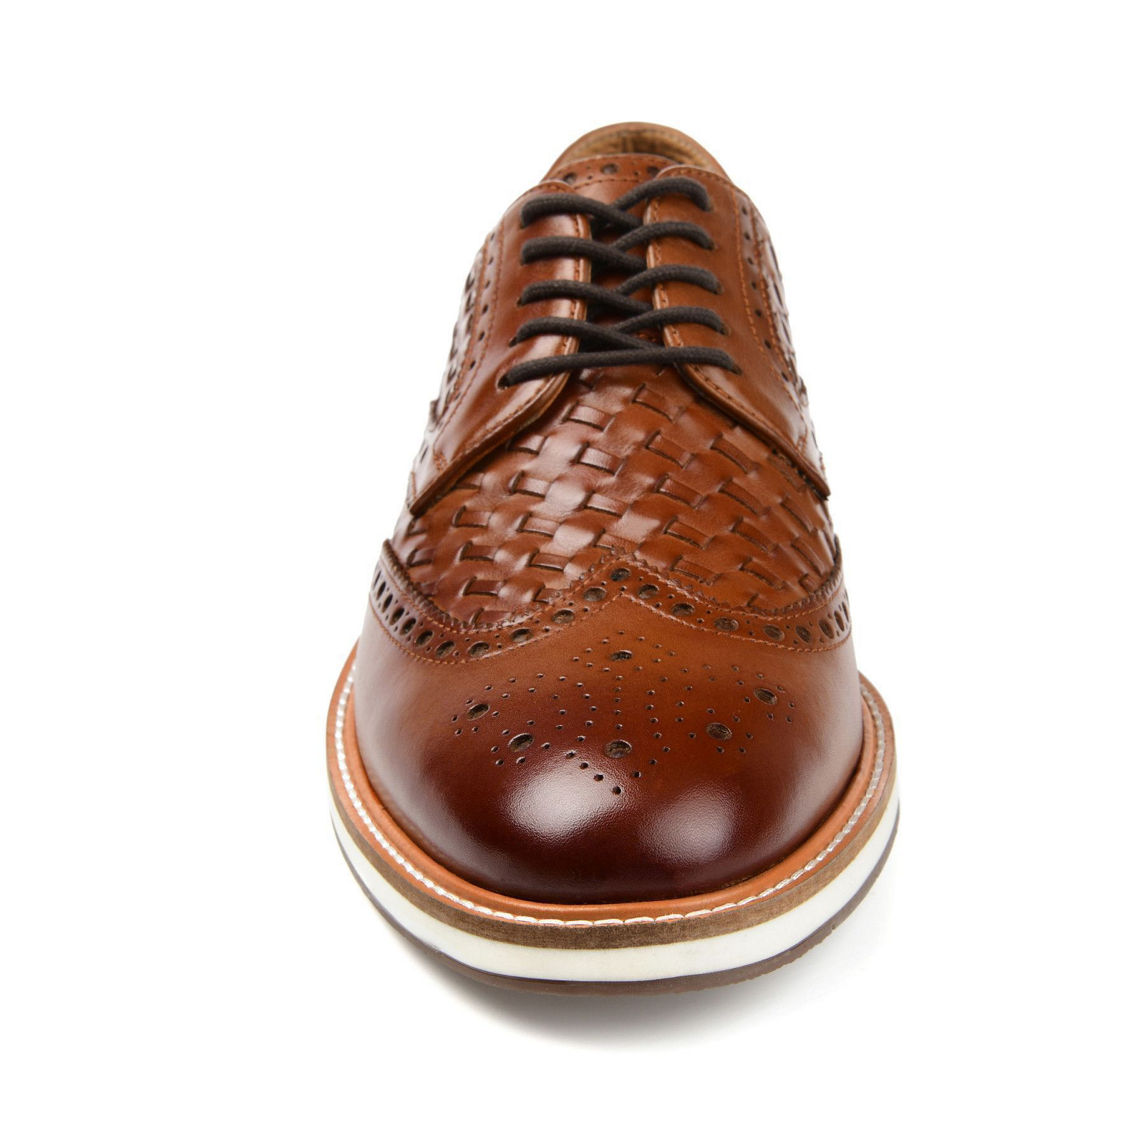 Thomas & Vine Radcliff Woven Wingtip Derby - Image 2 of 5